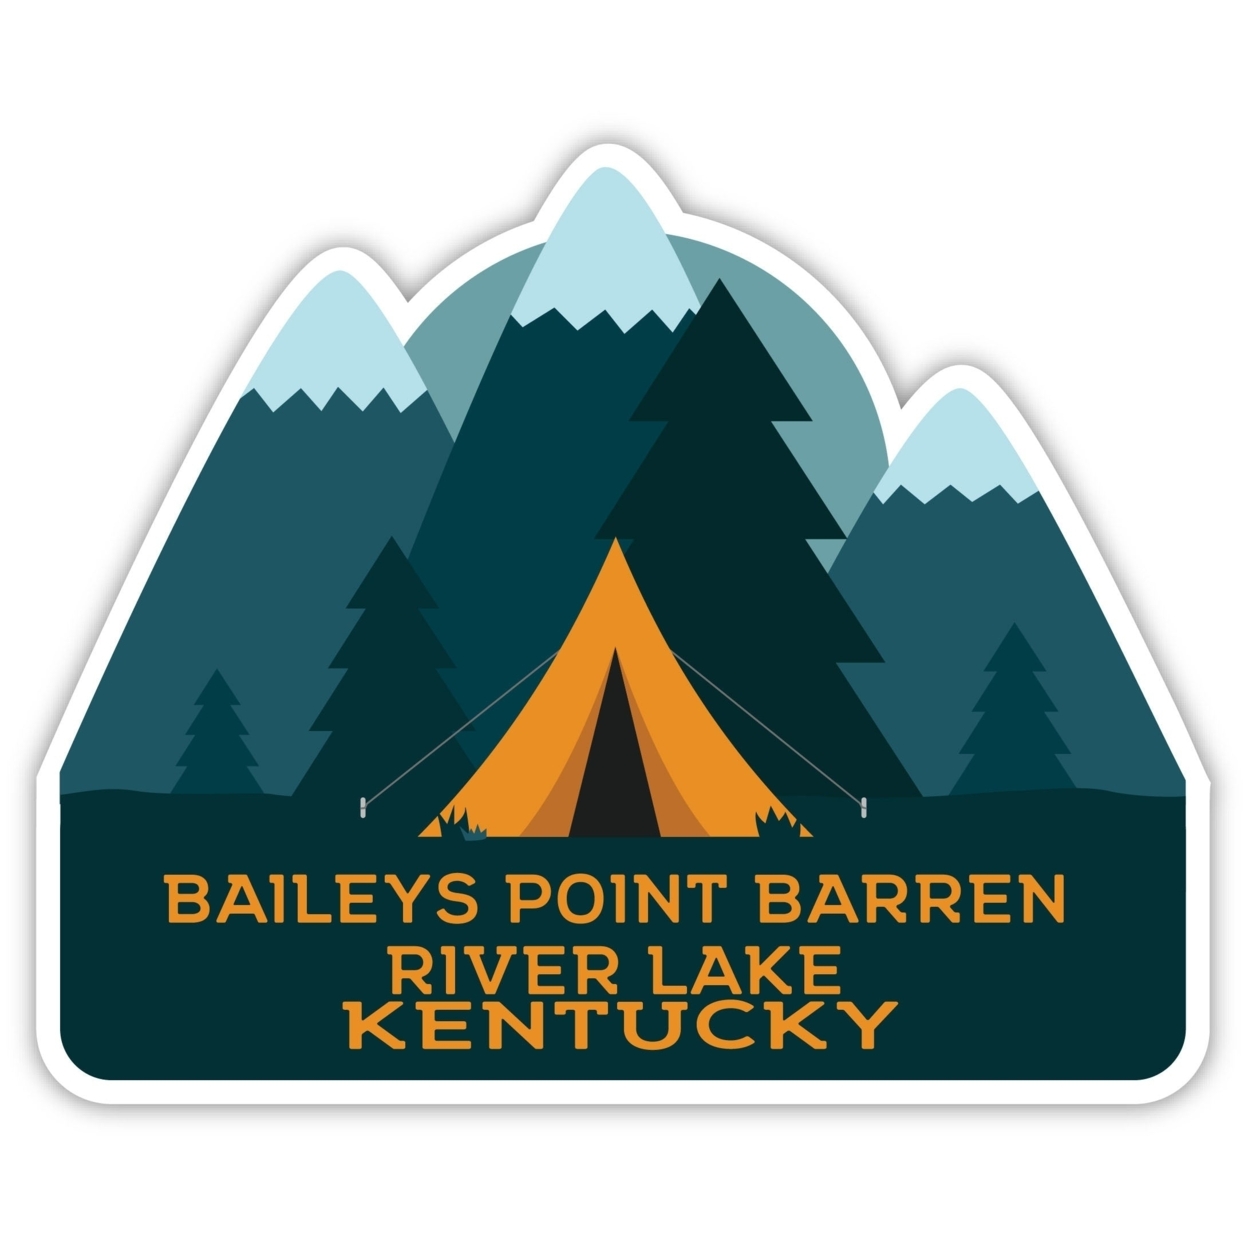 Baileys Point Barren River Lake Kentucky Souvenir Decorative Stickers (Choose Theme And Size) - 4-Pack, 6-Inch, Tent